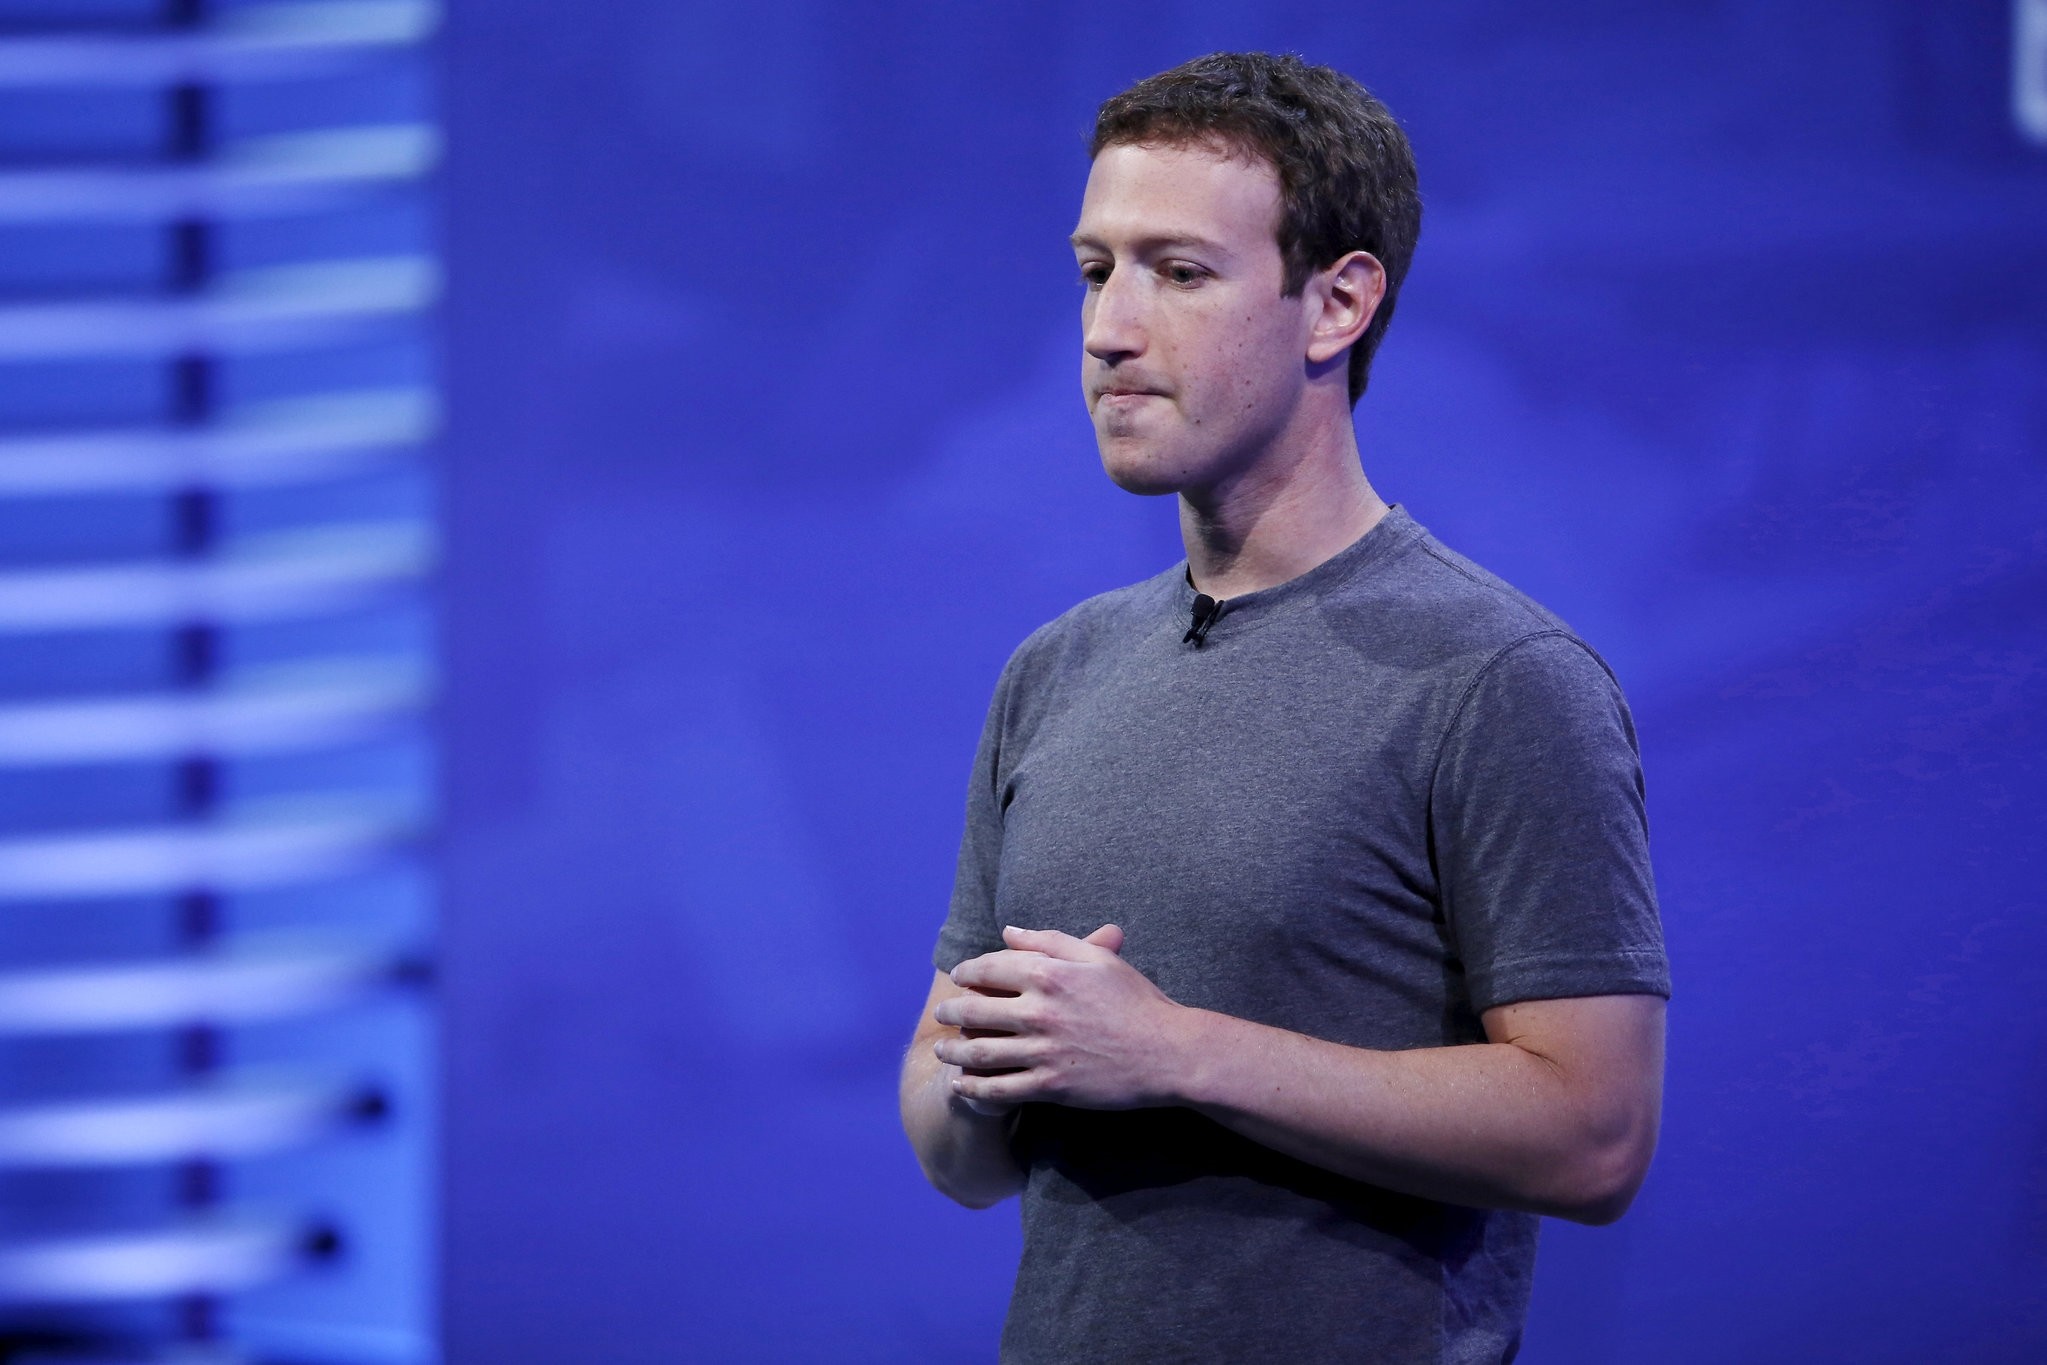 Facebook CEO Mark Zuckerberg speaks on stage during the Facebook F8 conference in San Francisco, California, U.S., April 12, 2016. (AFP Photo)